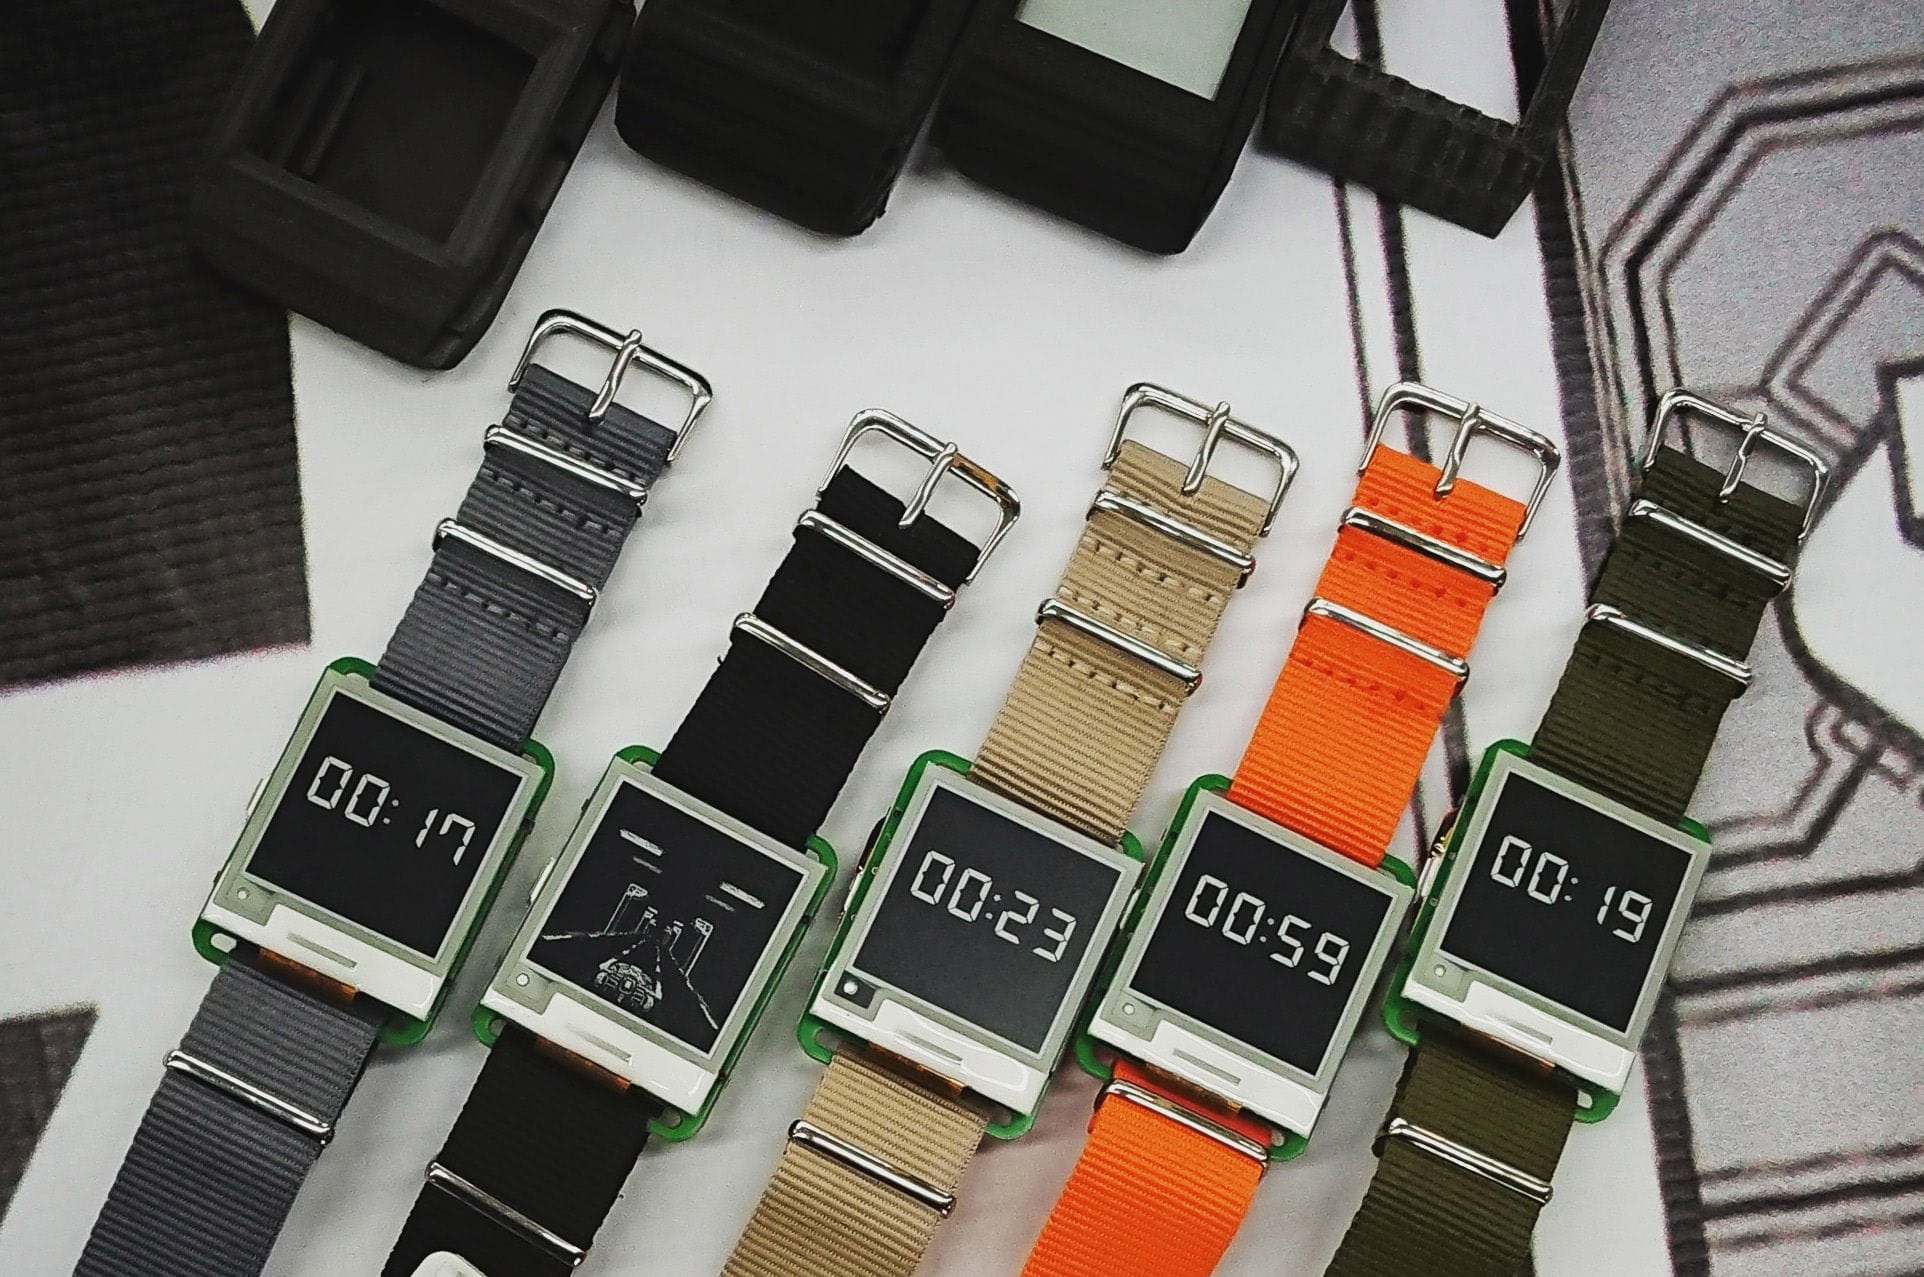 Watchy is a new E INK smartwatch that won't break the bank - Good e-Reader